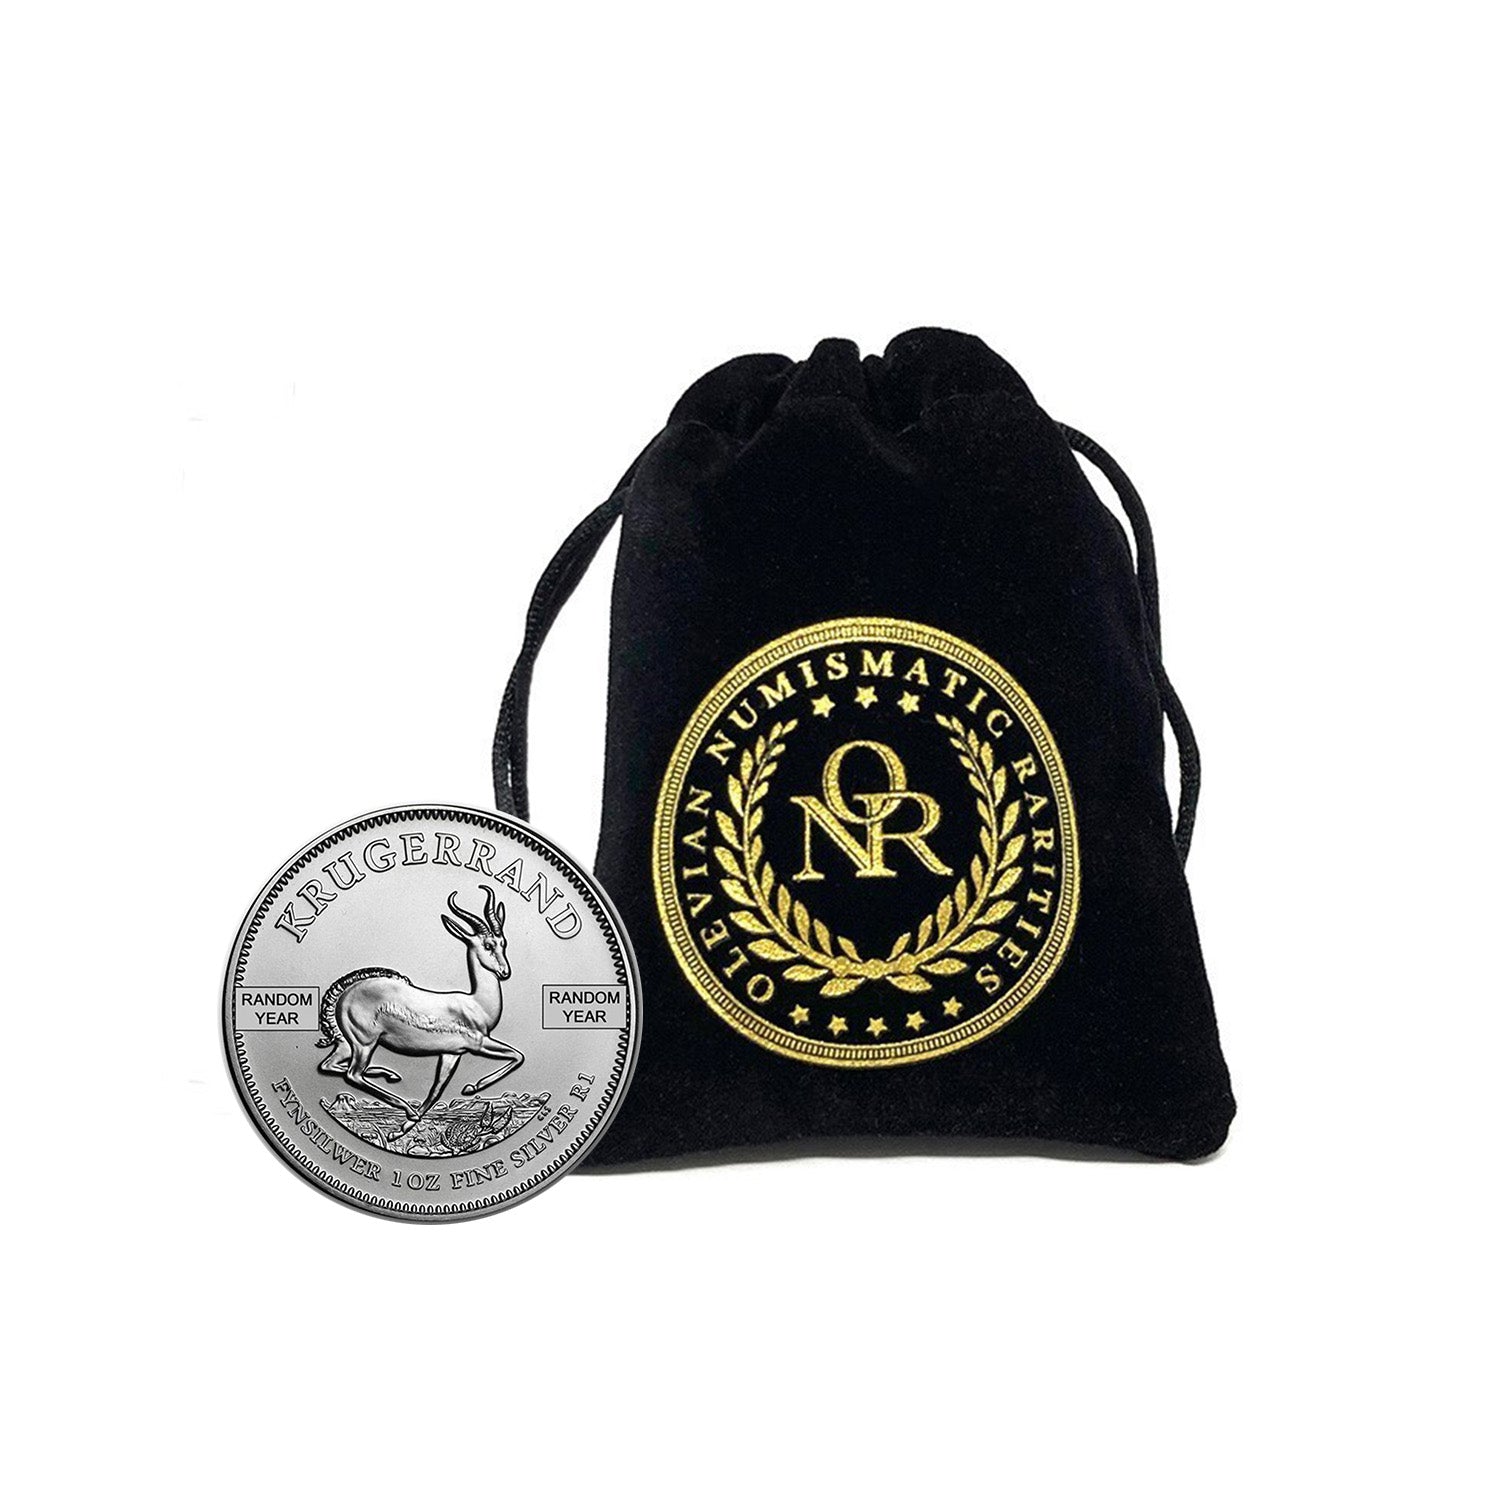 1 oz. South African Krugerrand- Year Varies in Deluxe Collector's Pouch